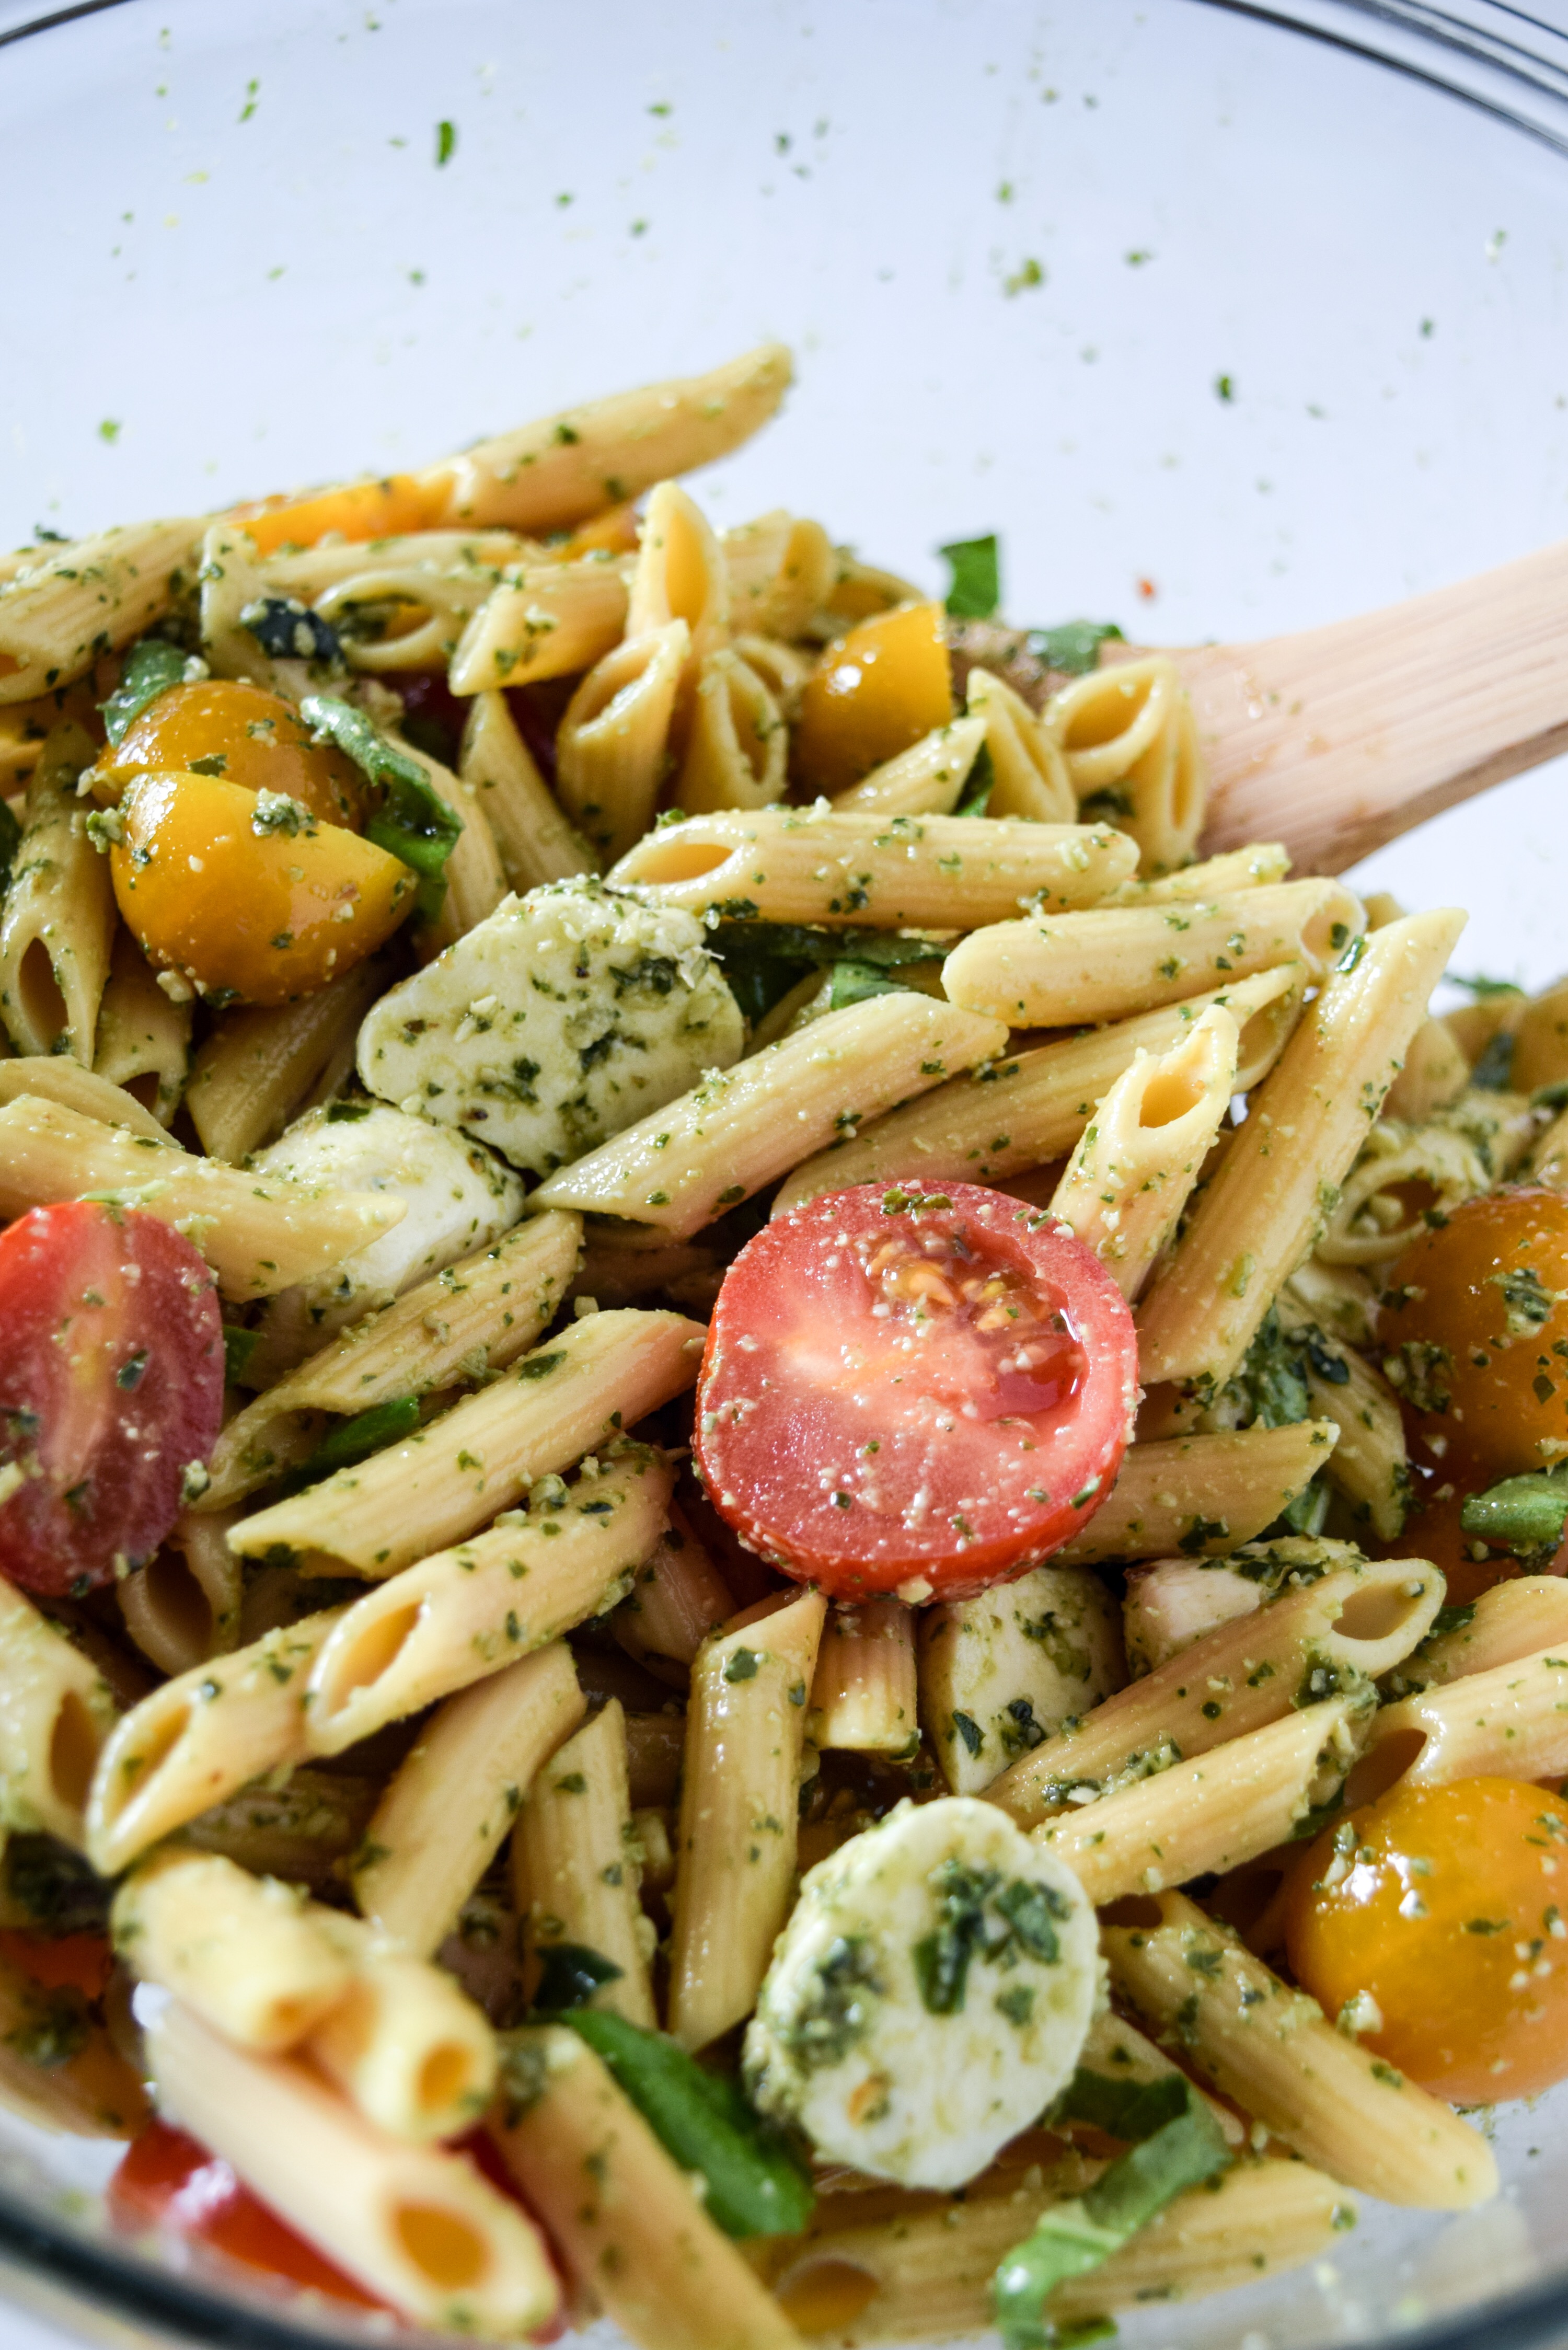 pesto pasta salad | easy pasta salad | summer bbq sides | healthy side dishes | healthy side recipes | pasta salad recipe | pasta salad | pesto pasta salad healthy | 